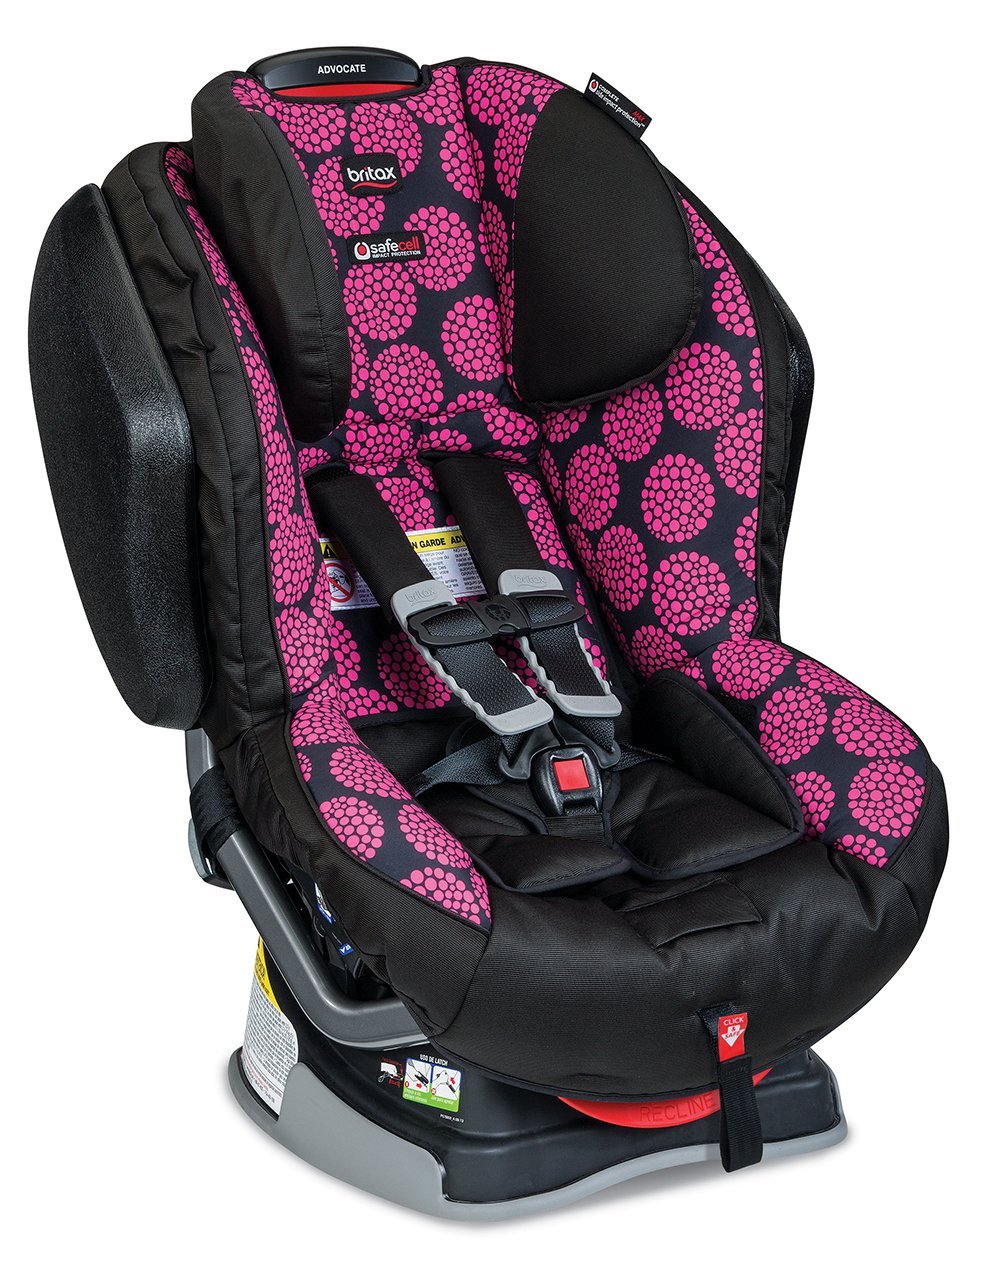 Best Convertible Car Seat 2018: Your Complete Guide